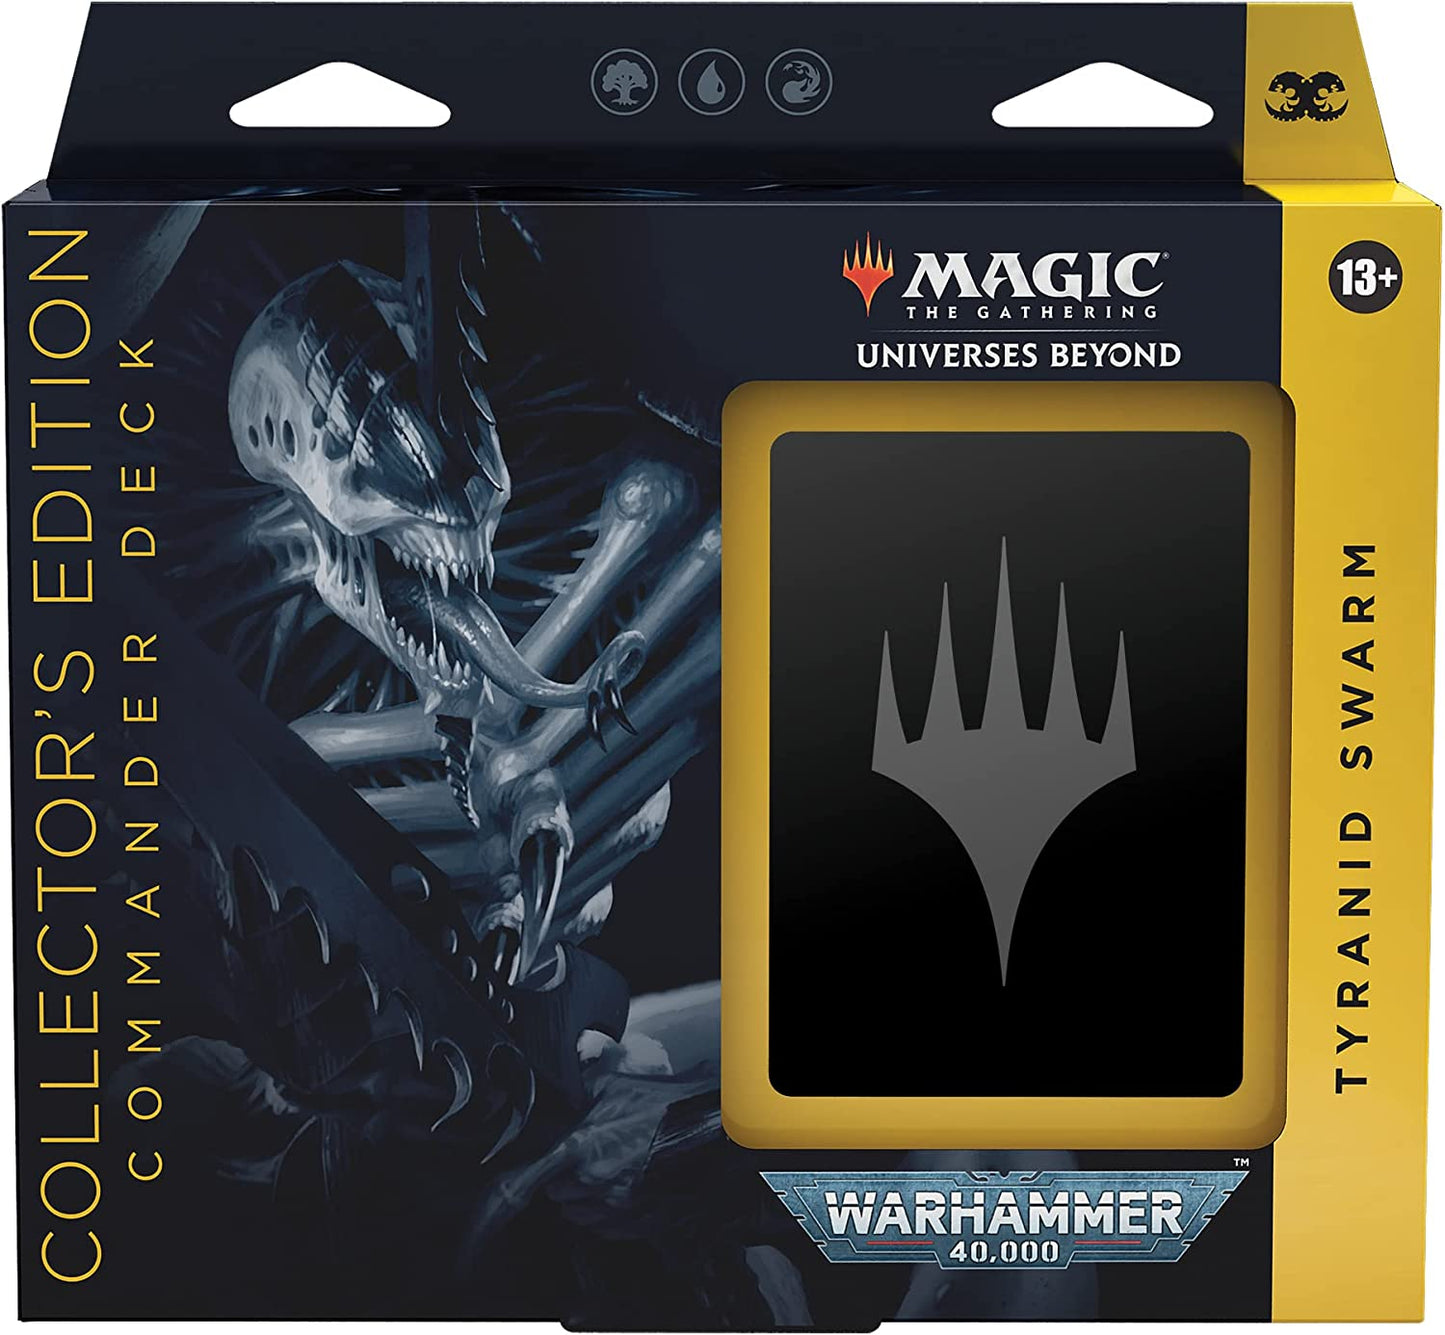 Magic: The Gathering Commander Deck - Universes Beyond: Warhammer 40,000 (Foil Collectors Edition) - Tyranid Swarm